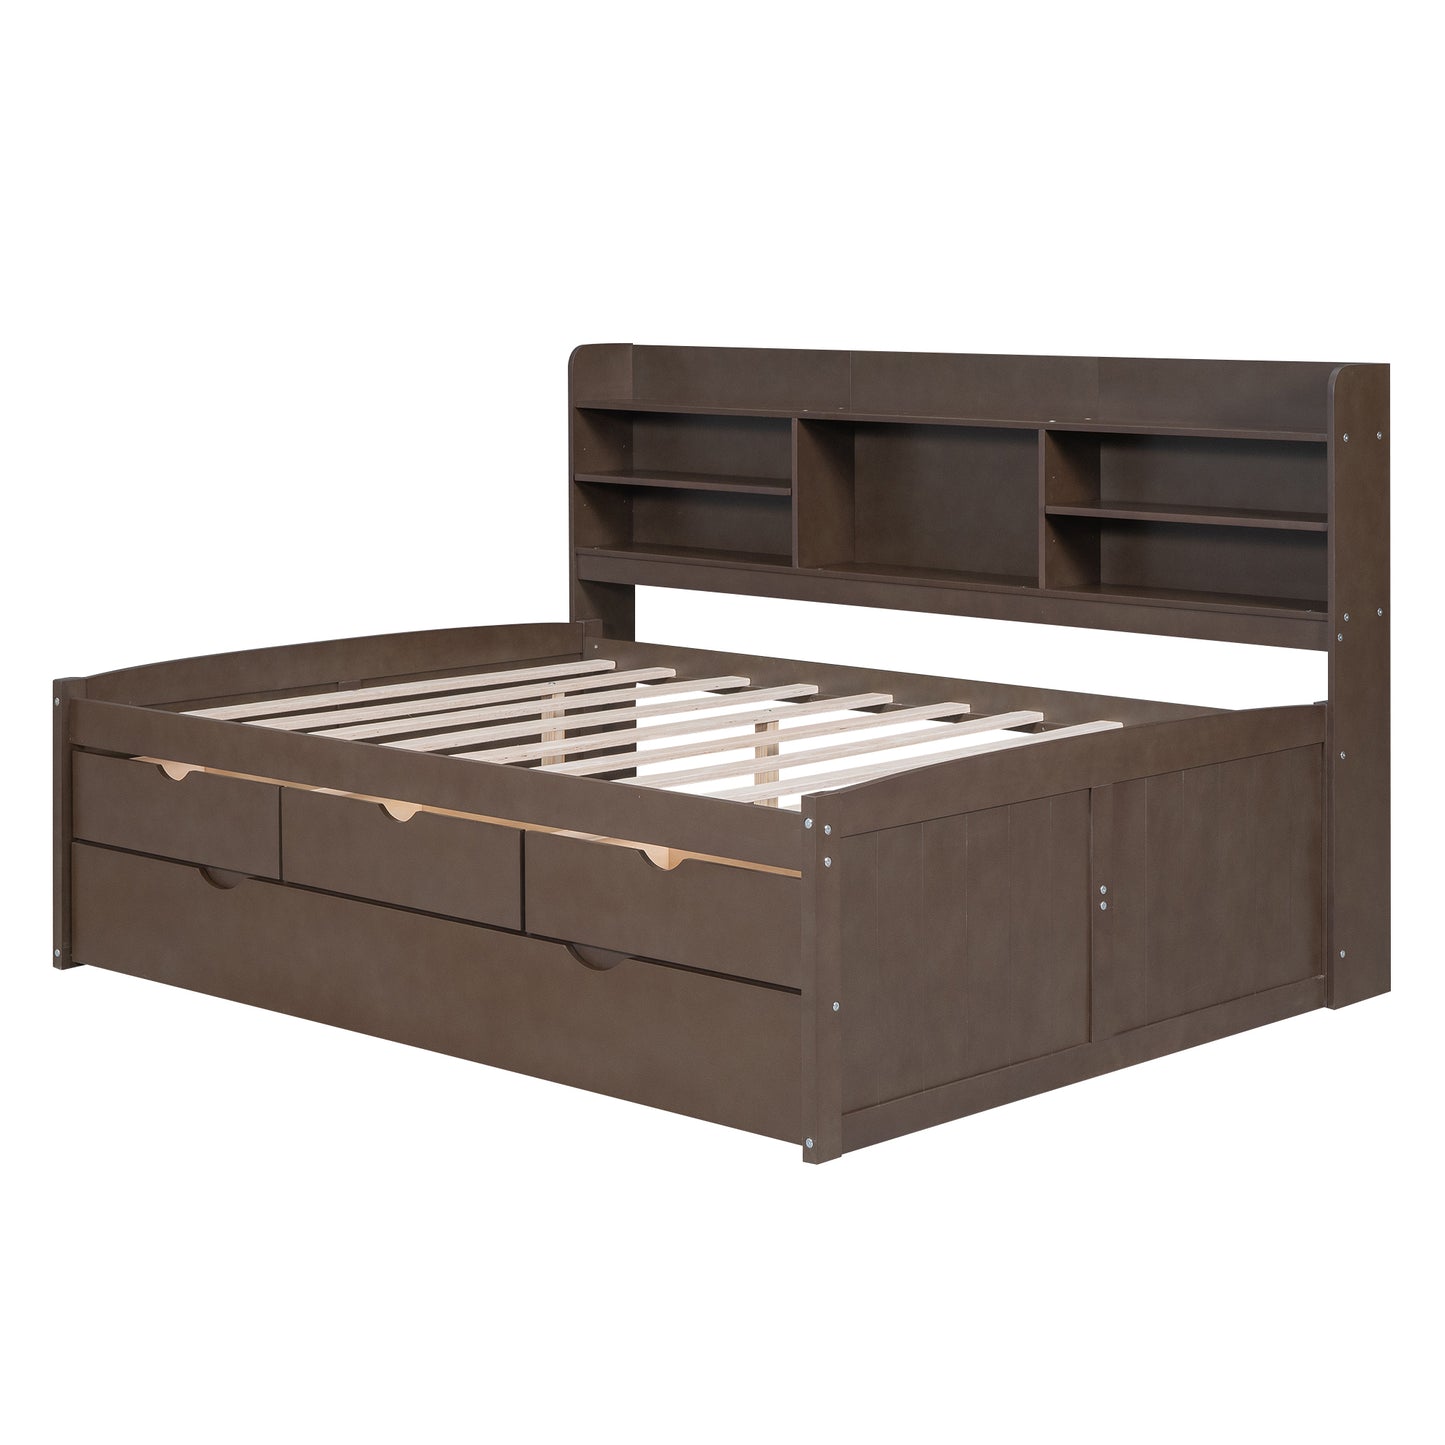 Full Size Wooden Captain Platform Bed with Built-in Bookshelves,Three Storage Drawers and Trundle,Antique Grey